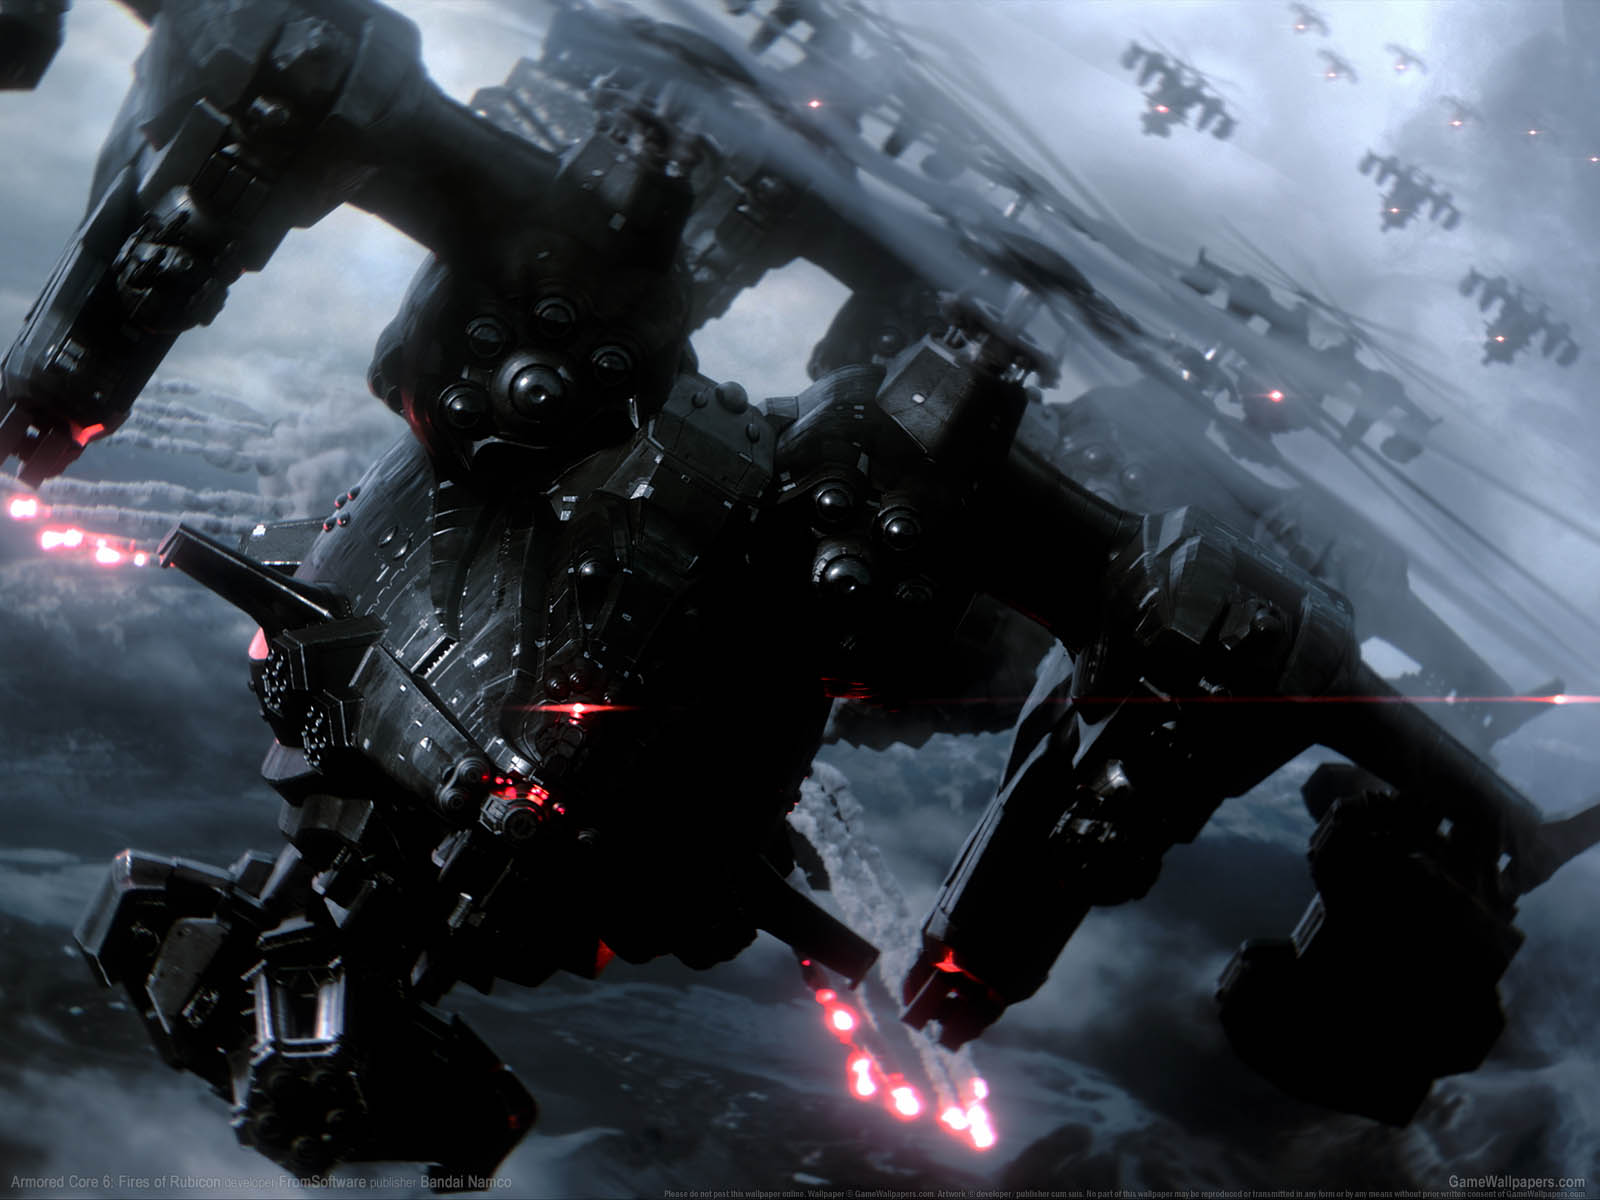 Armored Core 6%3A Fires of Rubicon fond d'cran 02 1600x1200